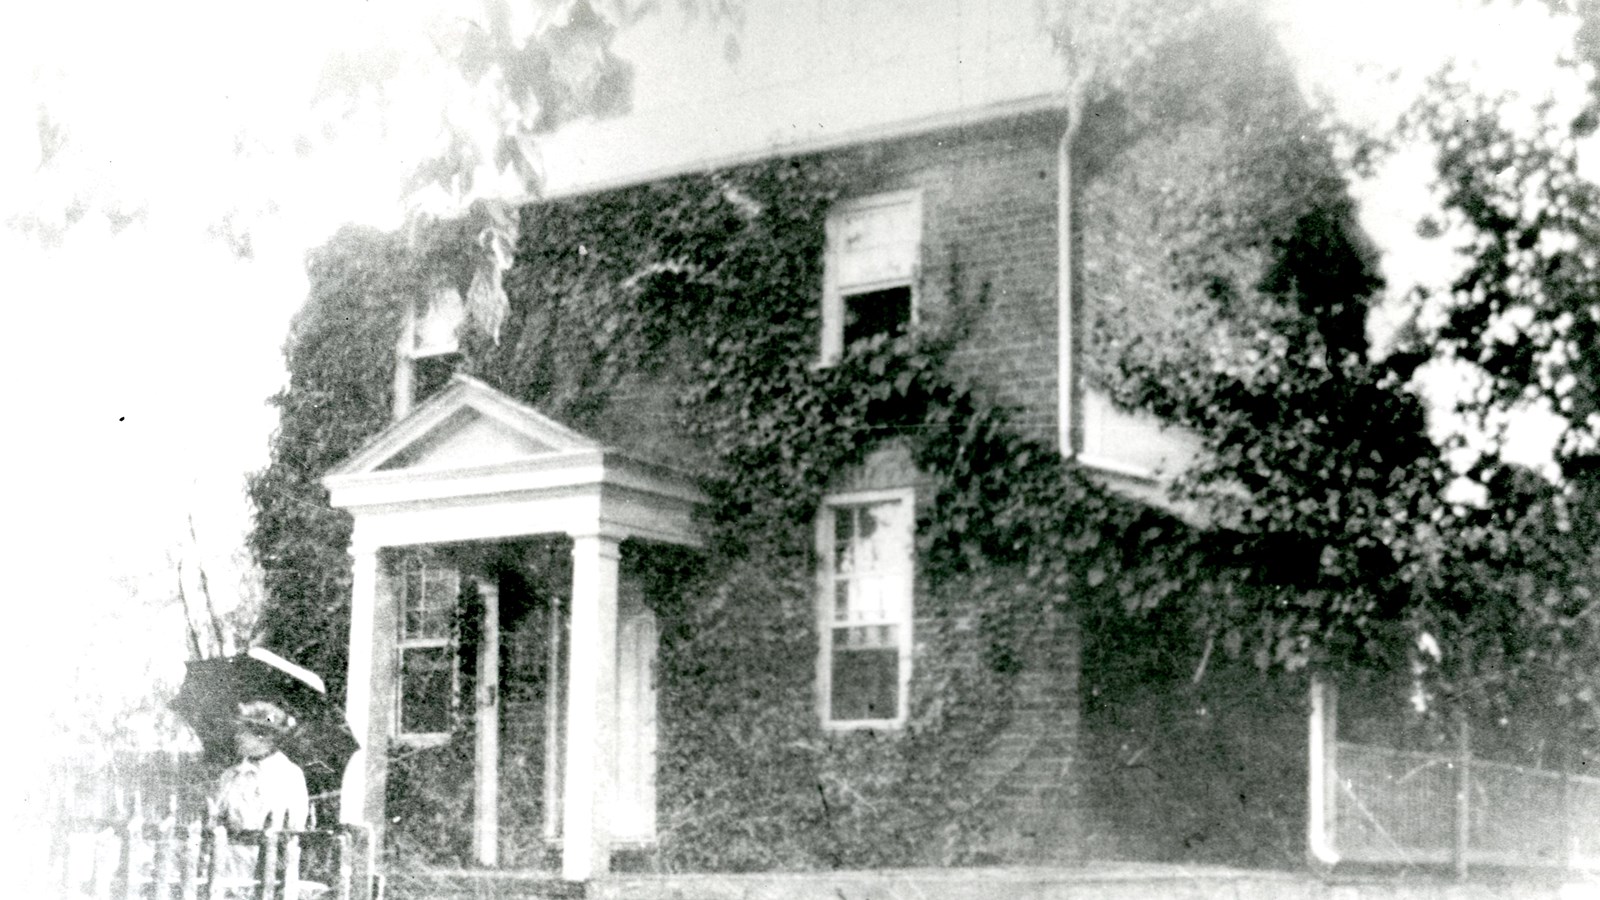 The Johnson Early Home